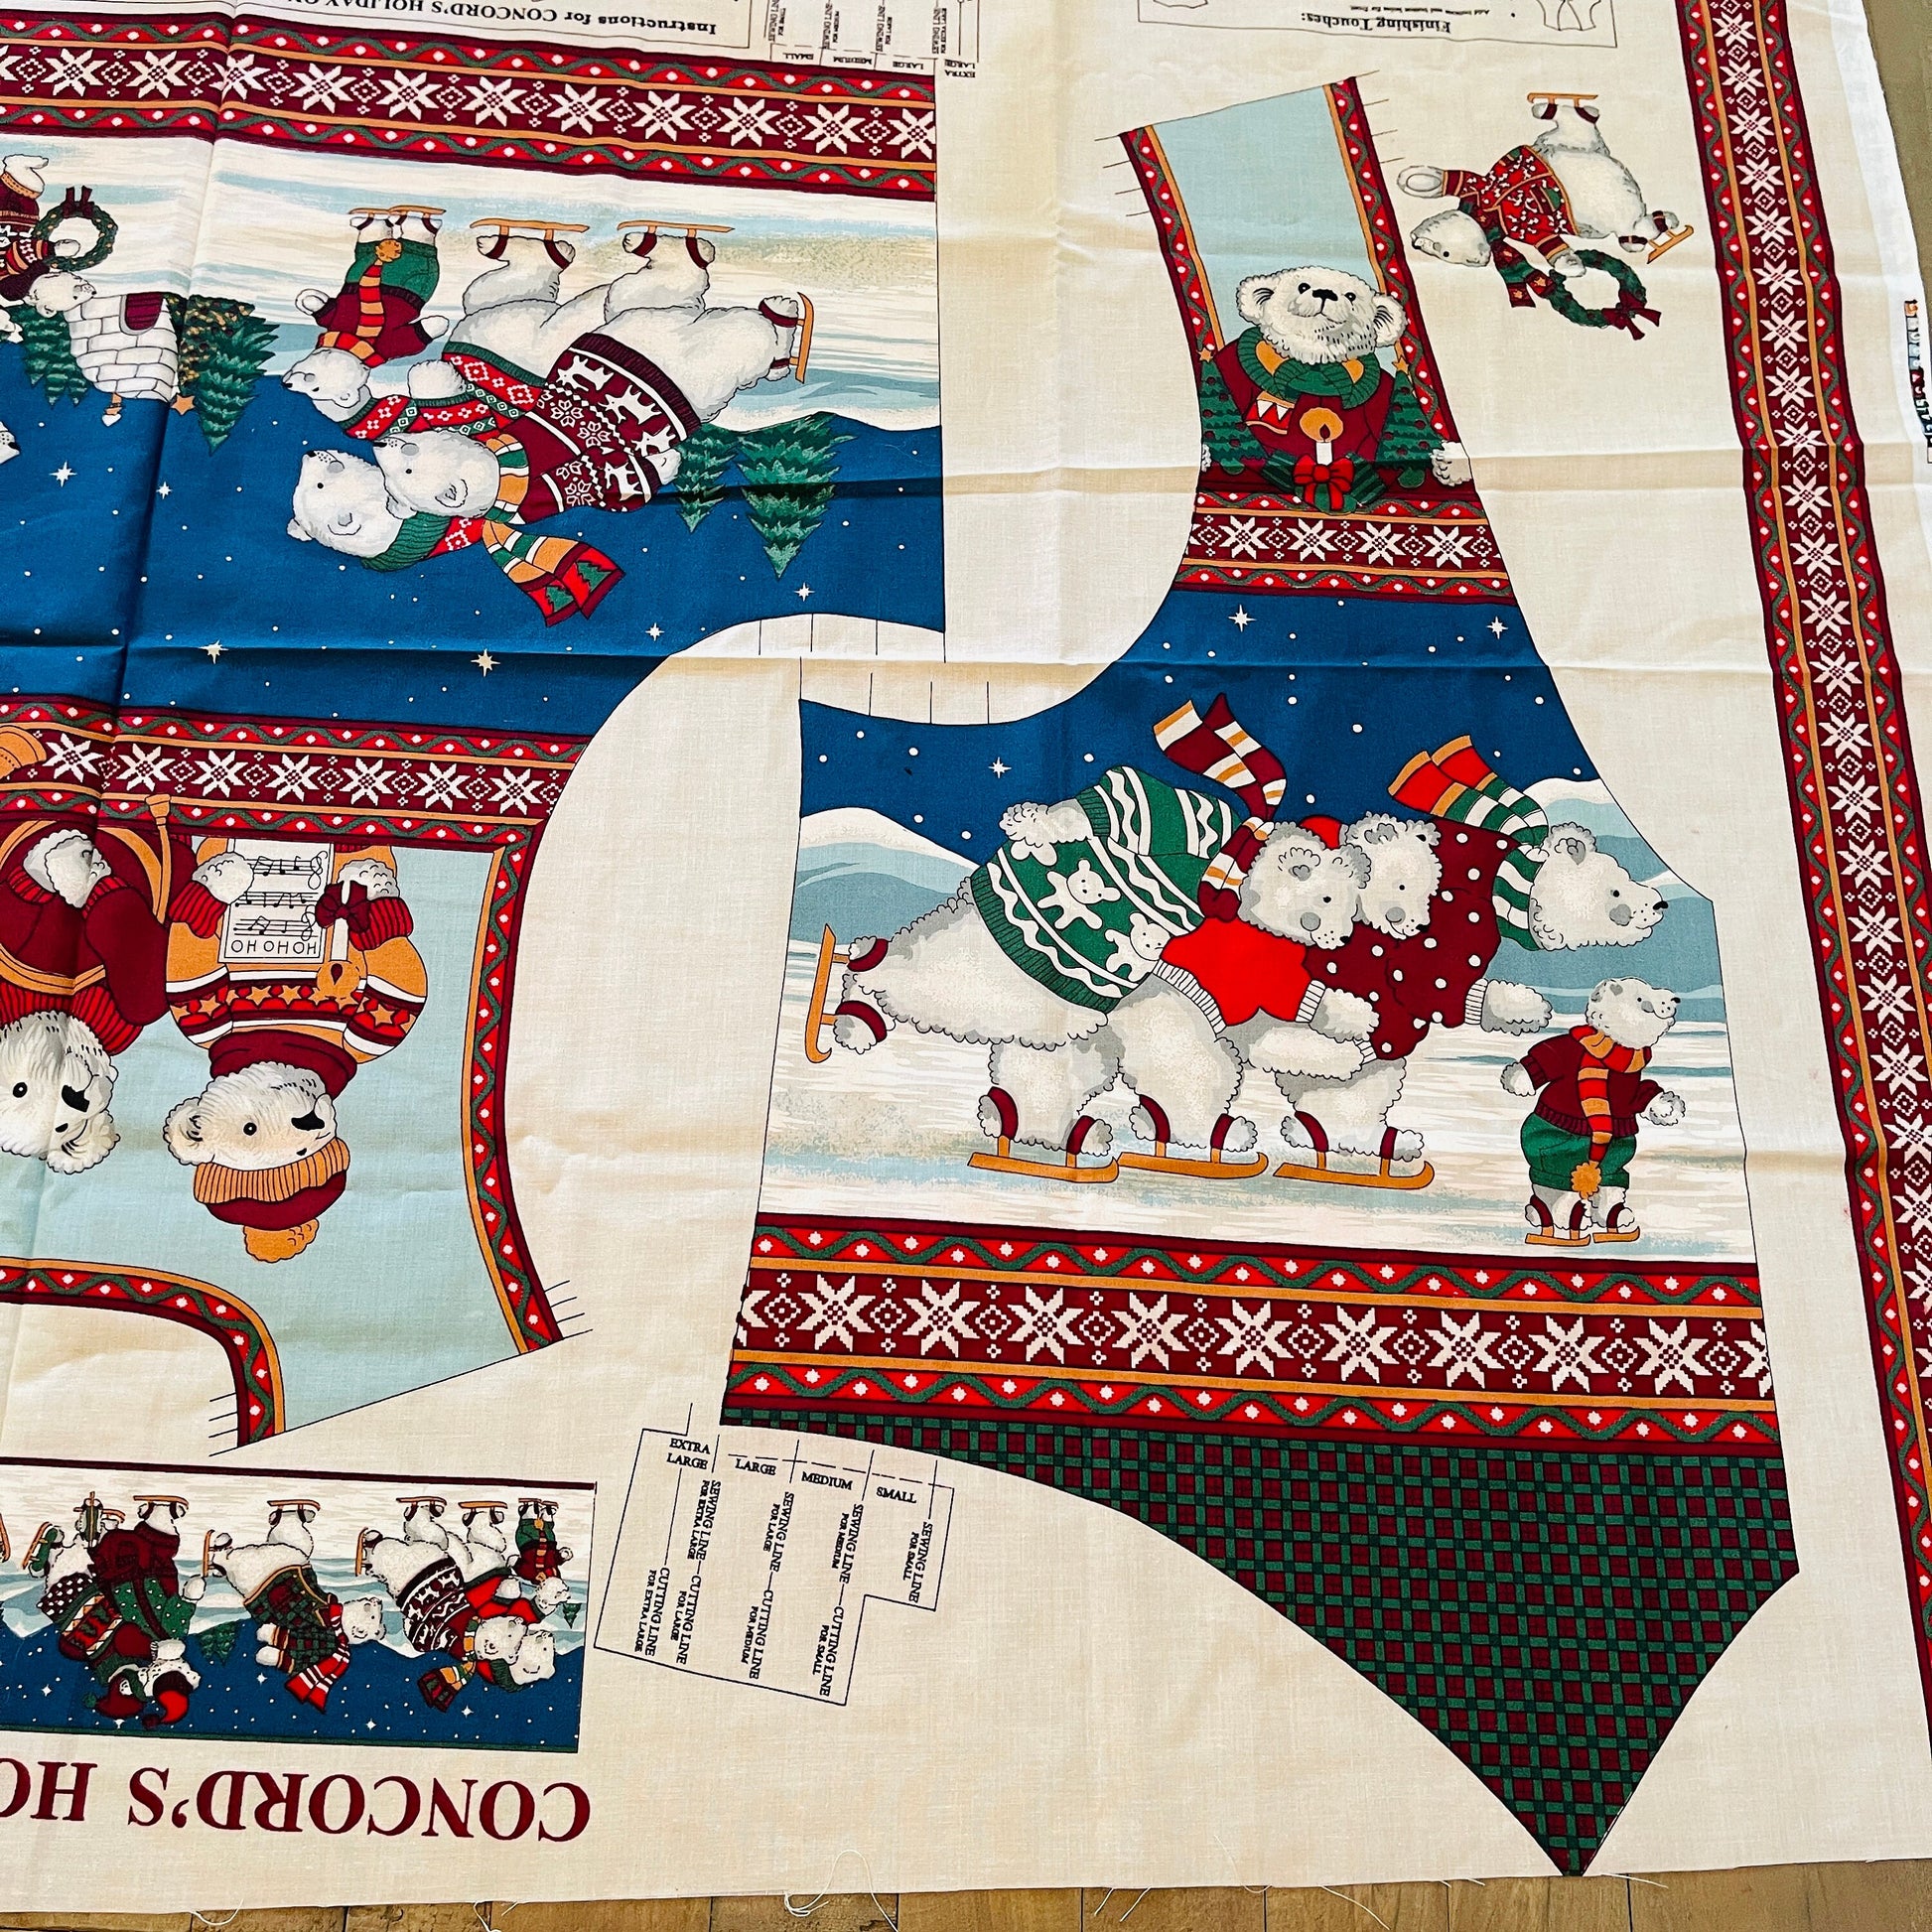 Concord's Holiday On ice, Vest, Fabric Panel, Fits Small to Extra Large